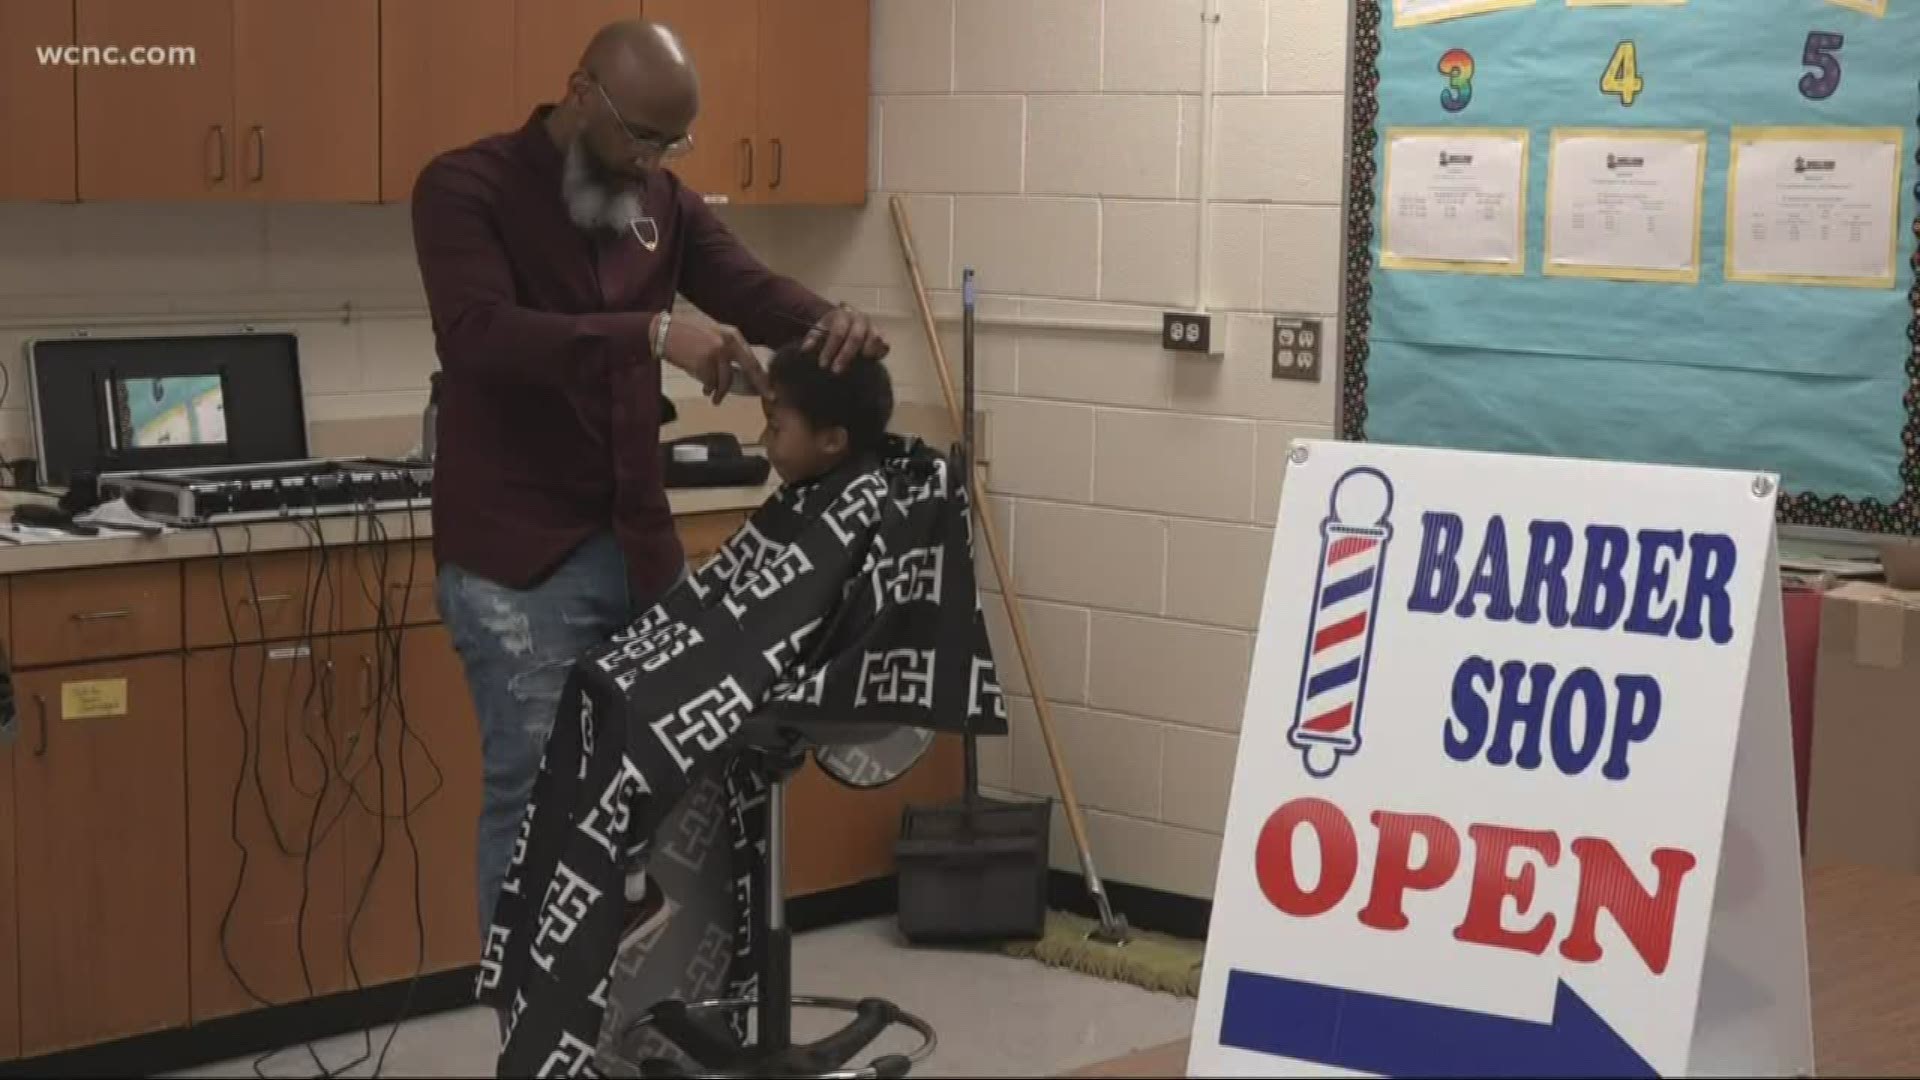 Every Wednesday, barber Elliot Riley begins prepping for his exclusive clientele at Reedy Creek Elementary.